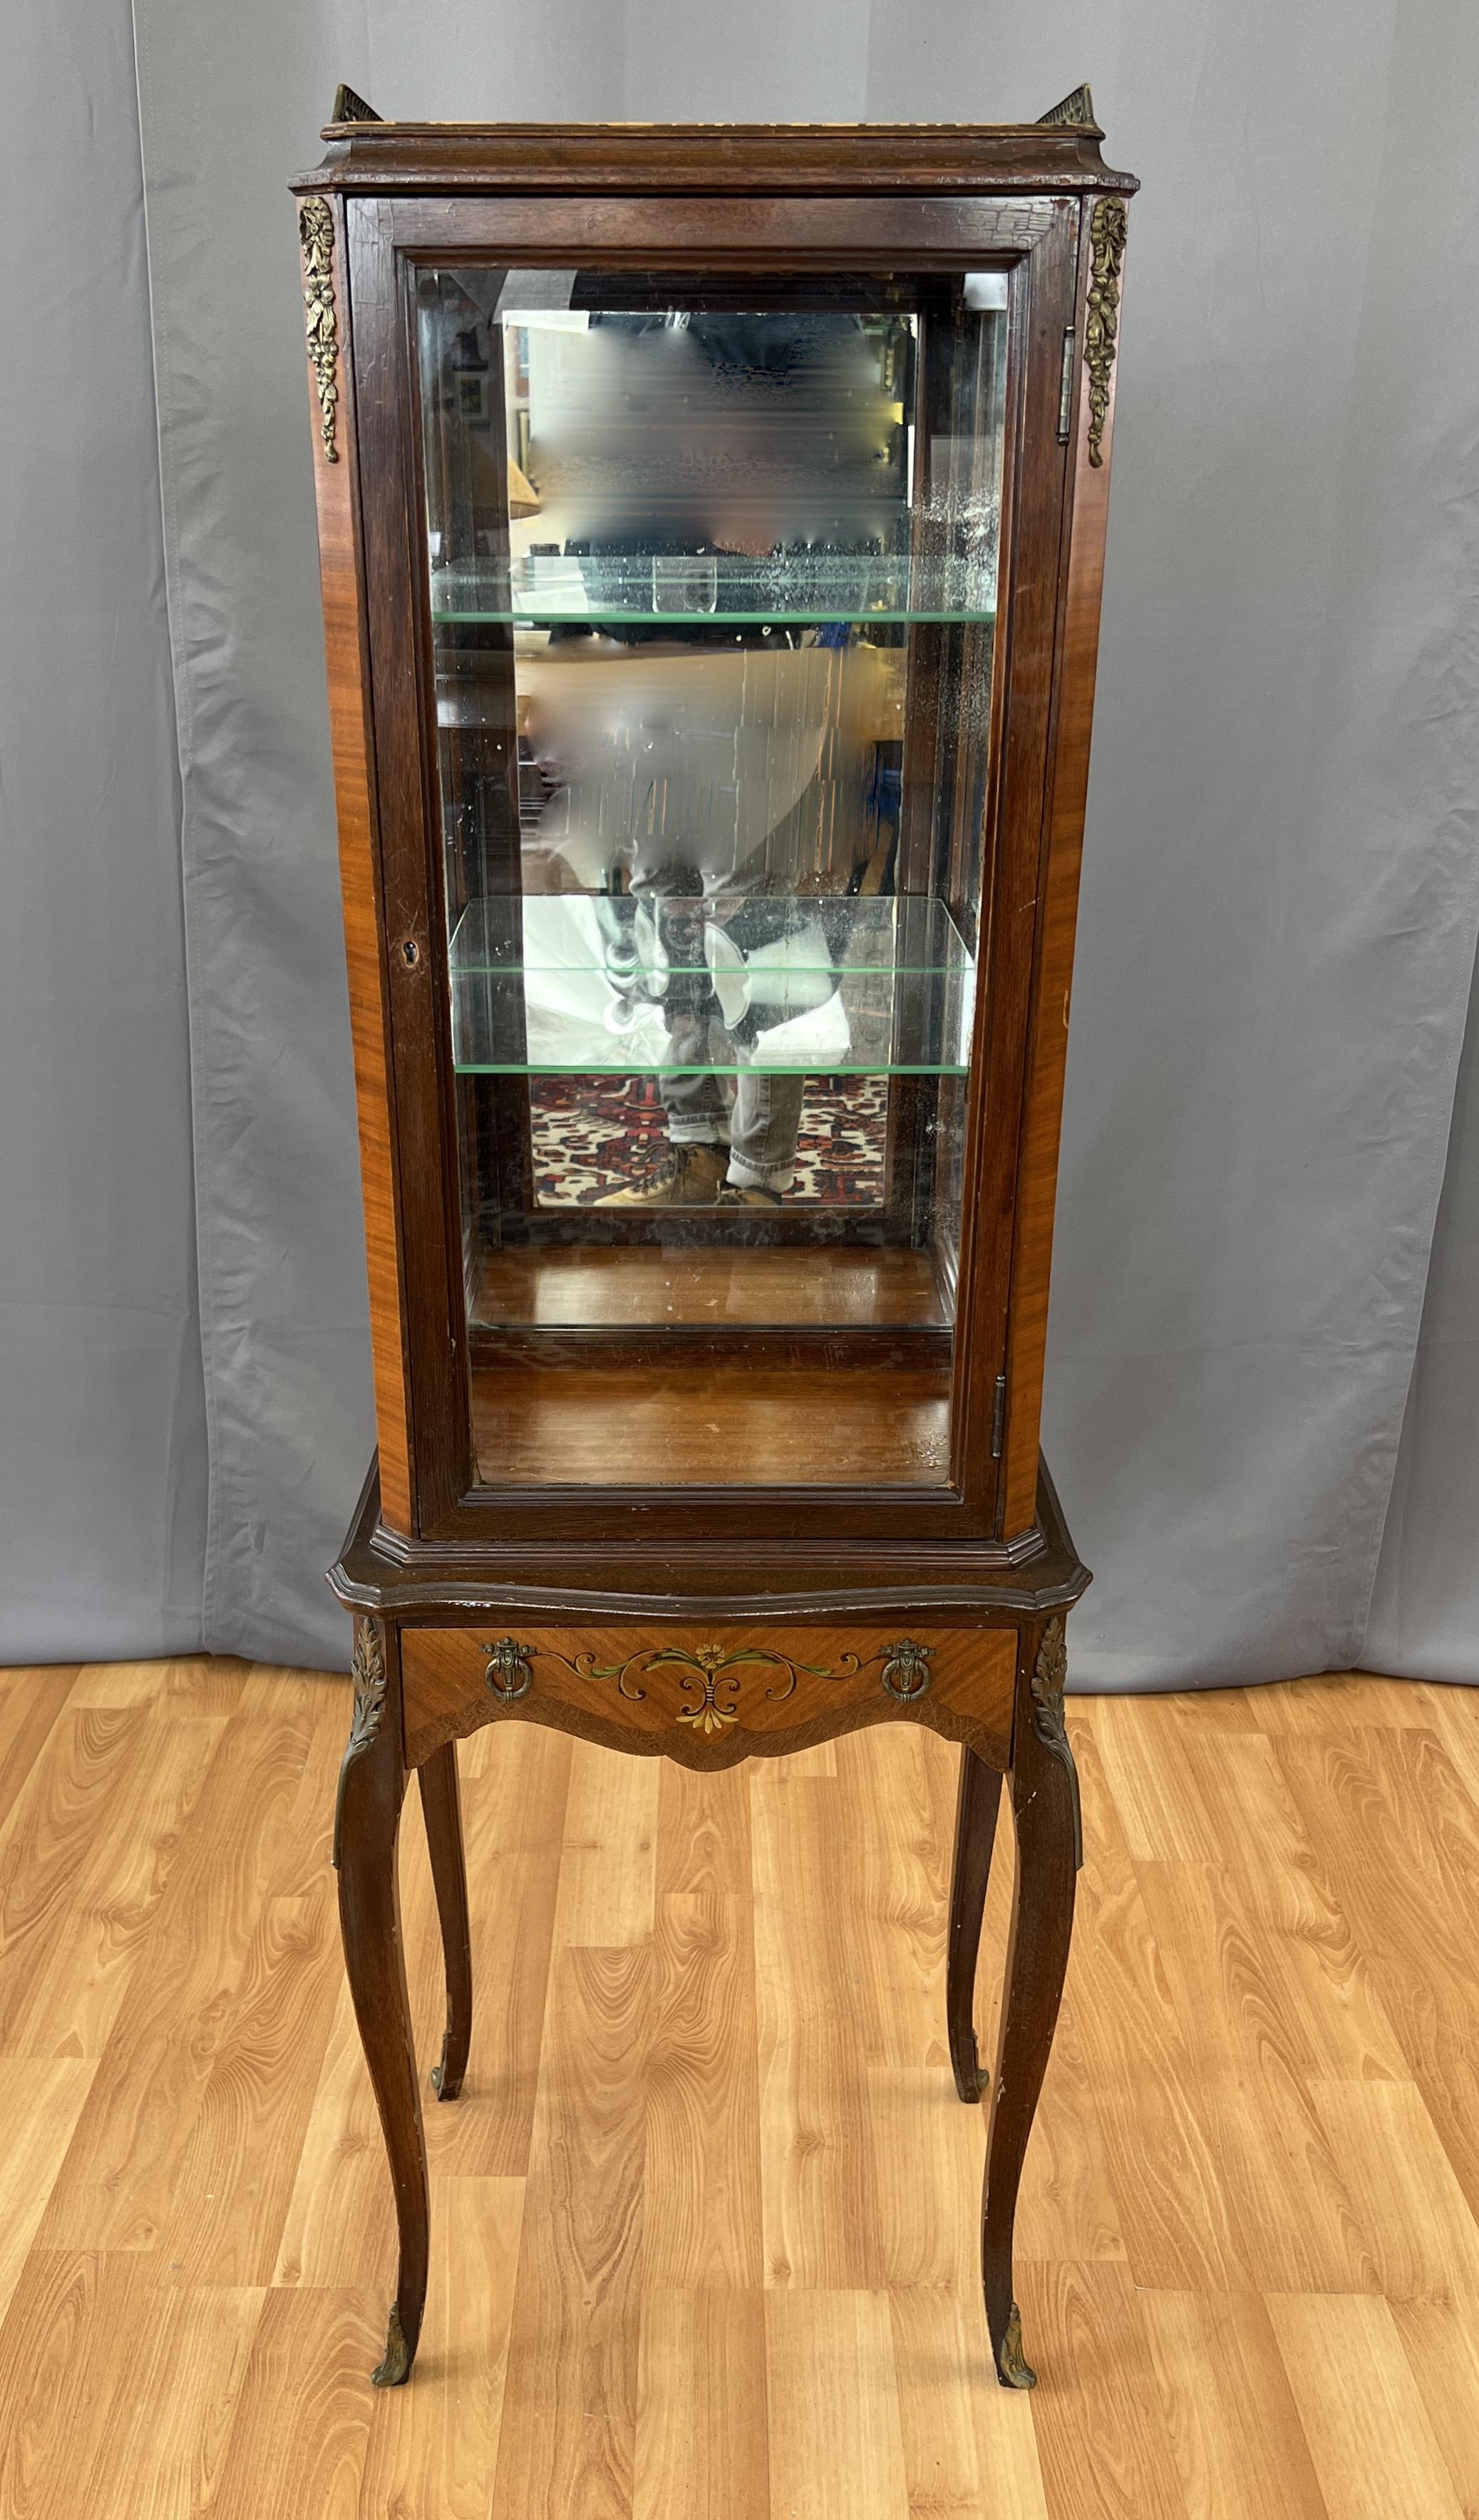 A wonderful circa 1920s Demi Edwardian Vitrine in the style of Louis XVI. Three sided glass unit on four long cabriole style legs finished with caps. Expertly hand painted florals on small drawer with two decorative pulls. Large glass wooden framed